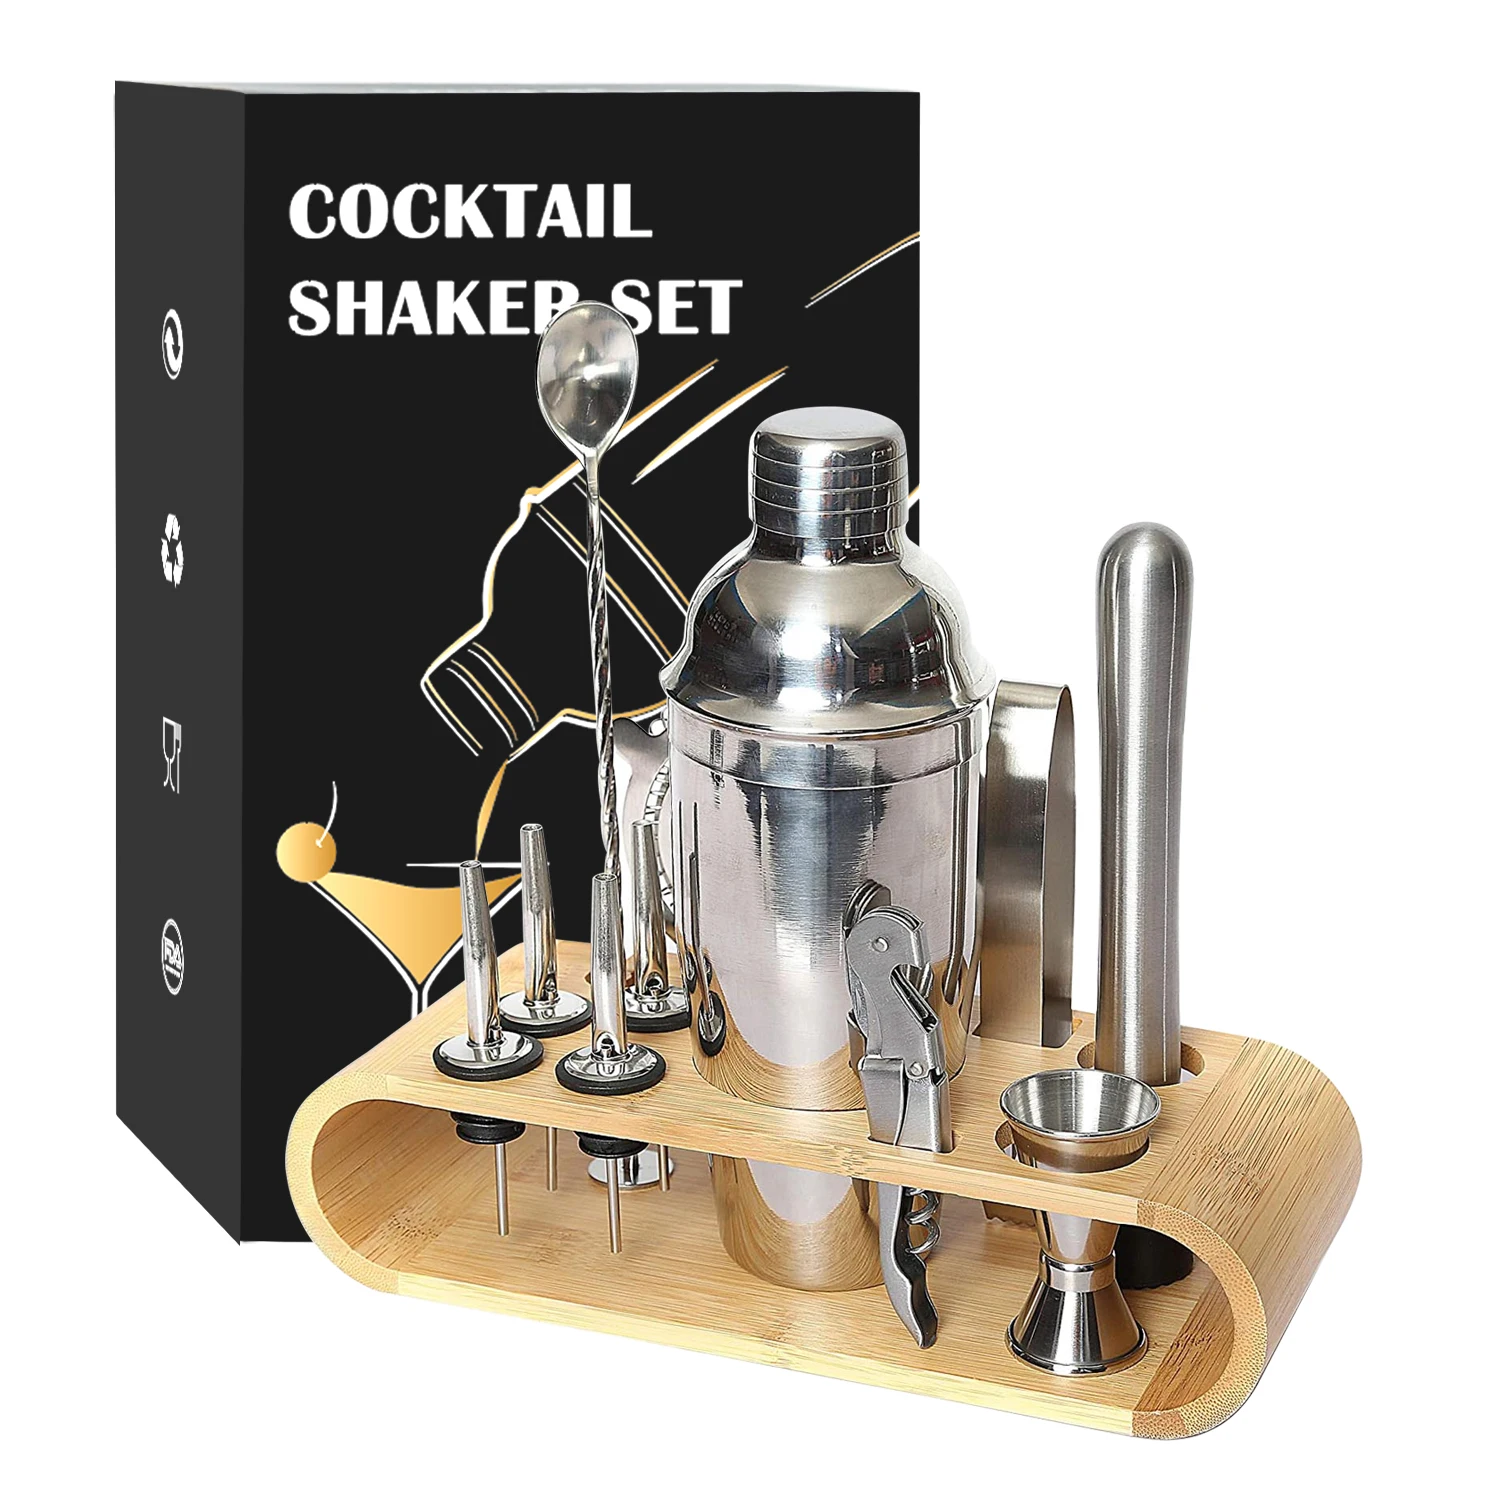 

Professional Barware Tools Wooden Stand Bag Travel Gift Stainless Steel Bartender Kit Bar Accessories Jigger Cocktail Shaker Set, Silver,customized color